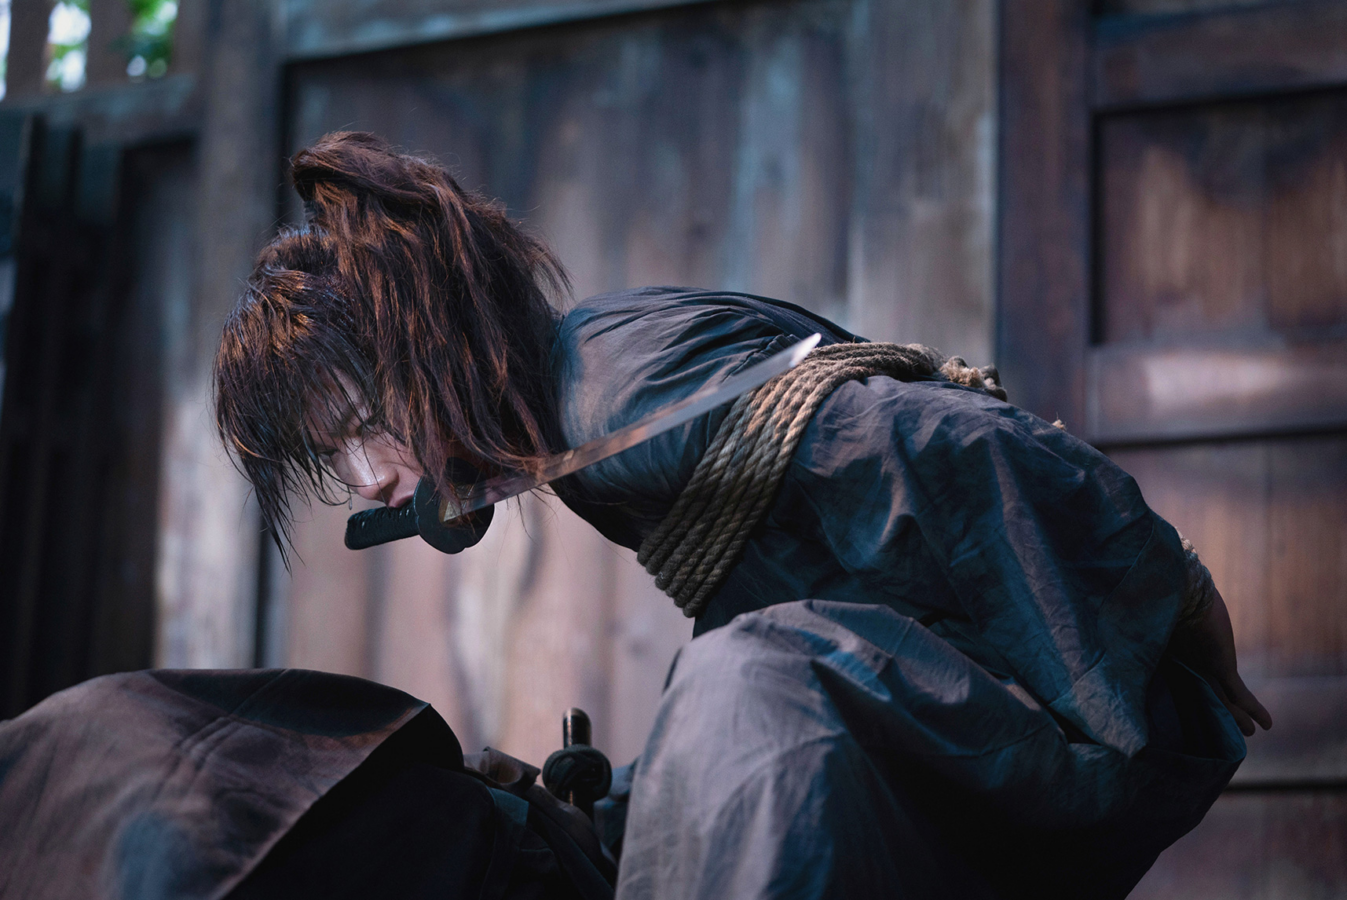 Film Review: Rurouni Kenshin: The Beginning is a prequel that concludes the  Kenshin saga - adobo Magazine Online